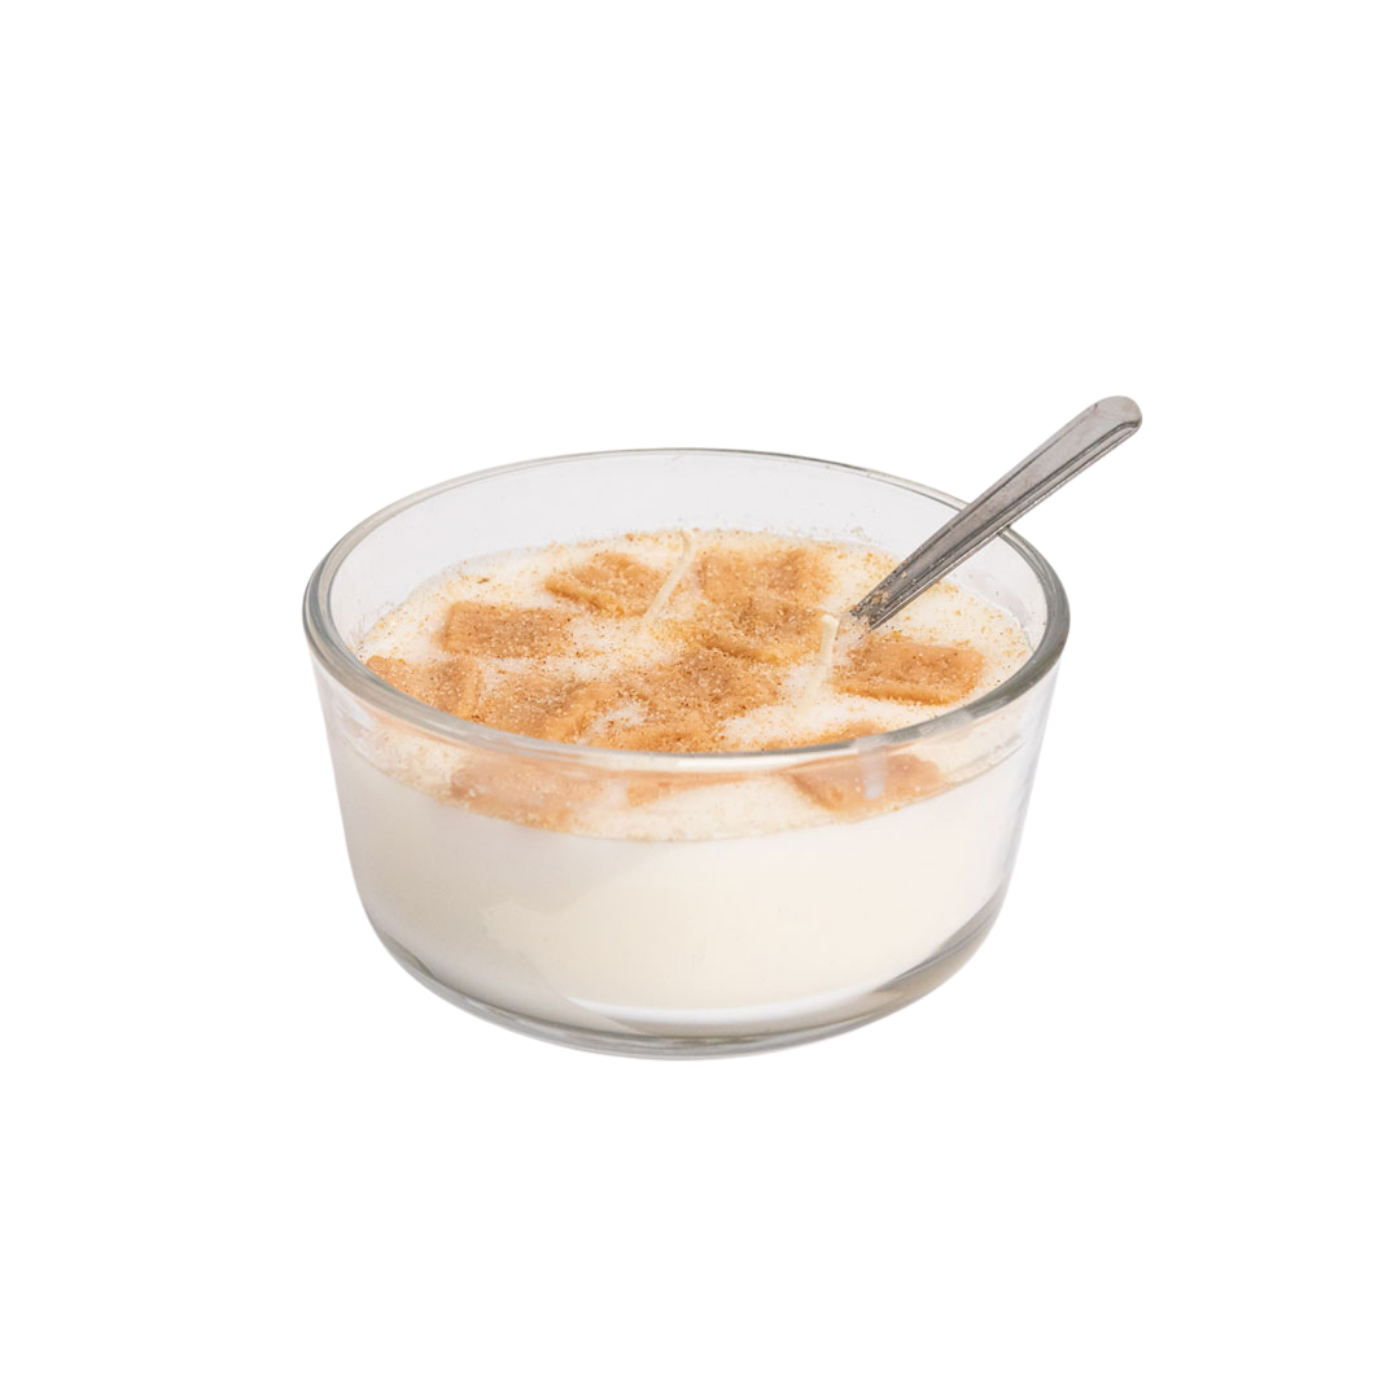 Cereal Candle: Cinnamon Crunch